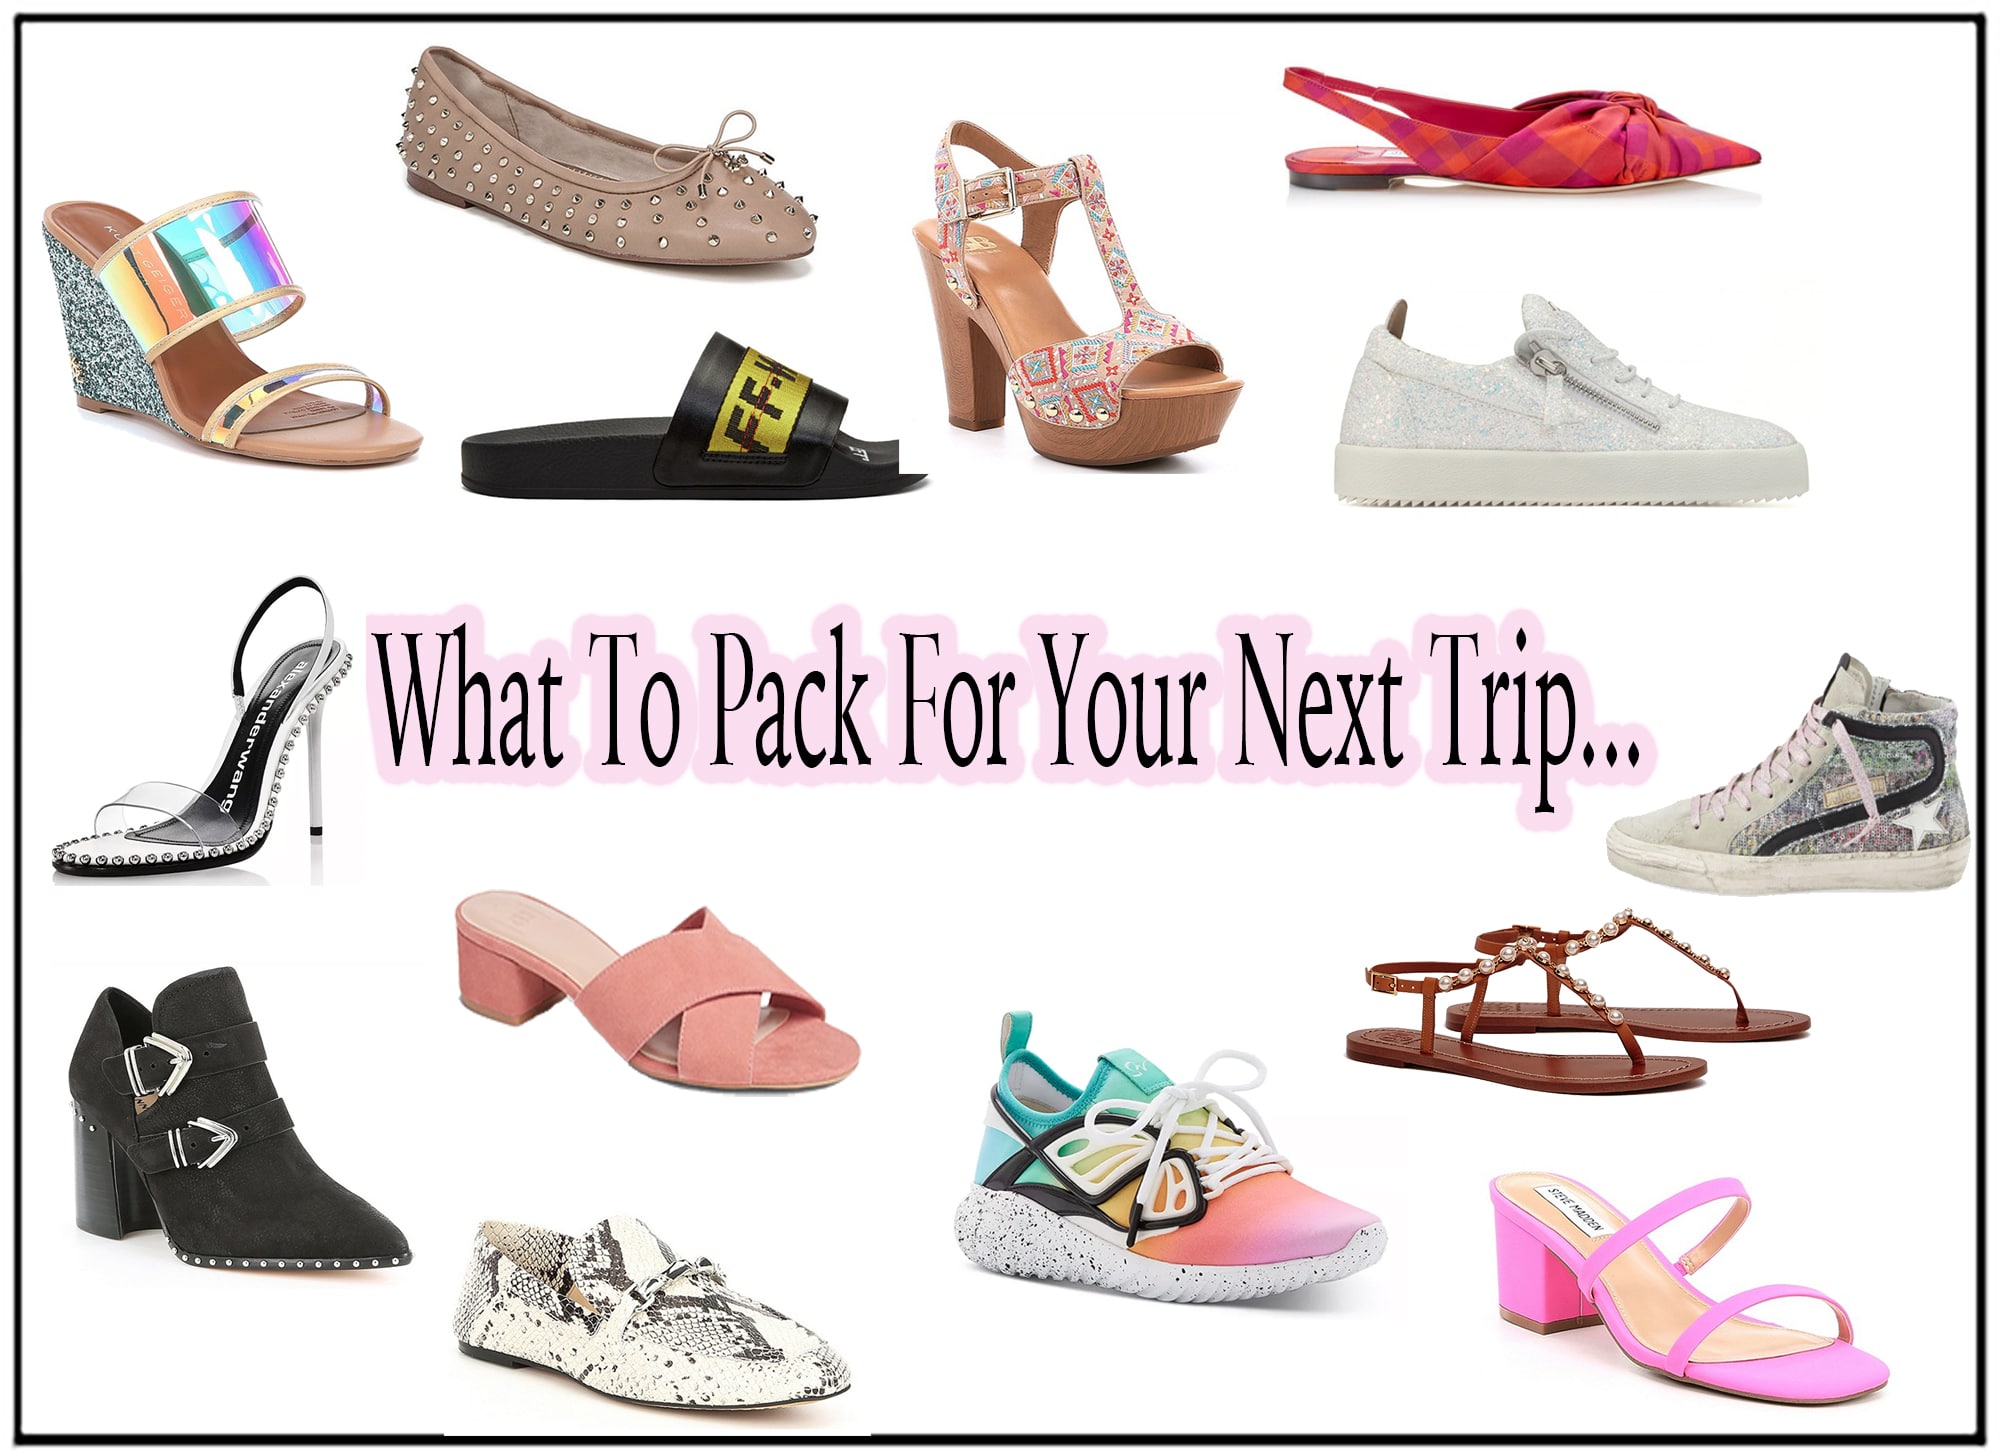 Travel Shoes - What To Pack For Your Next Trip